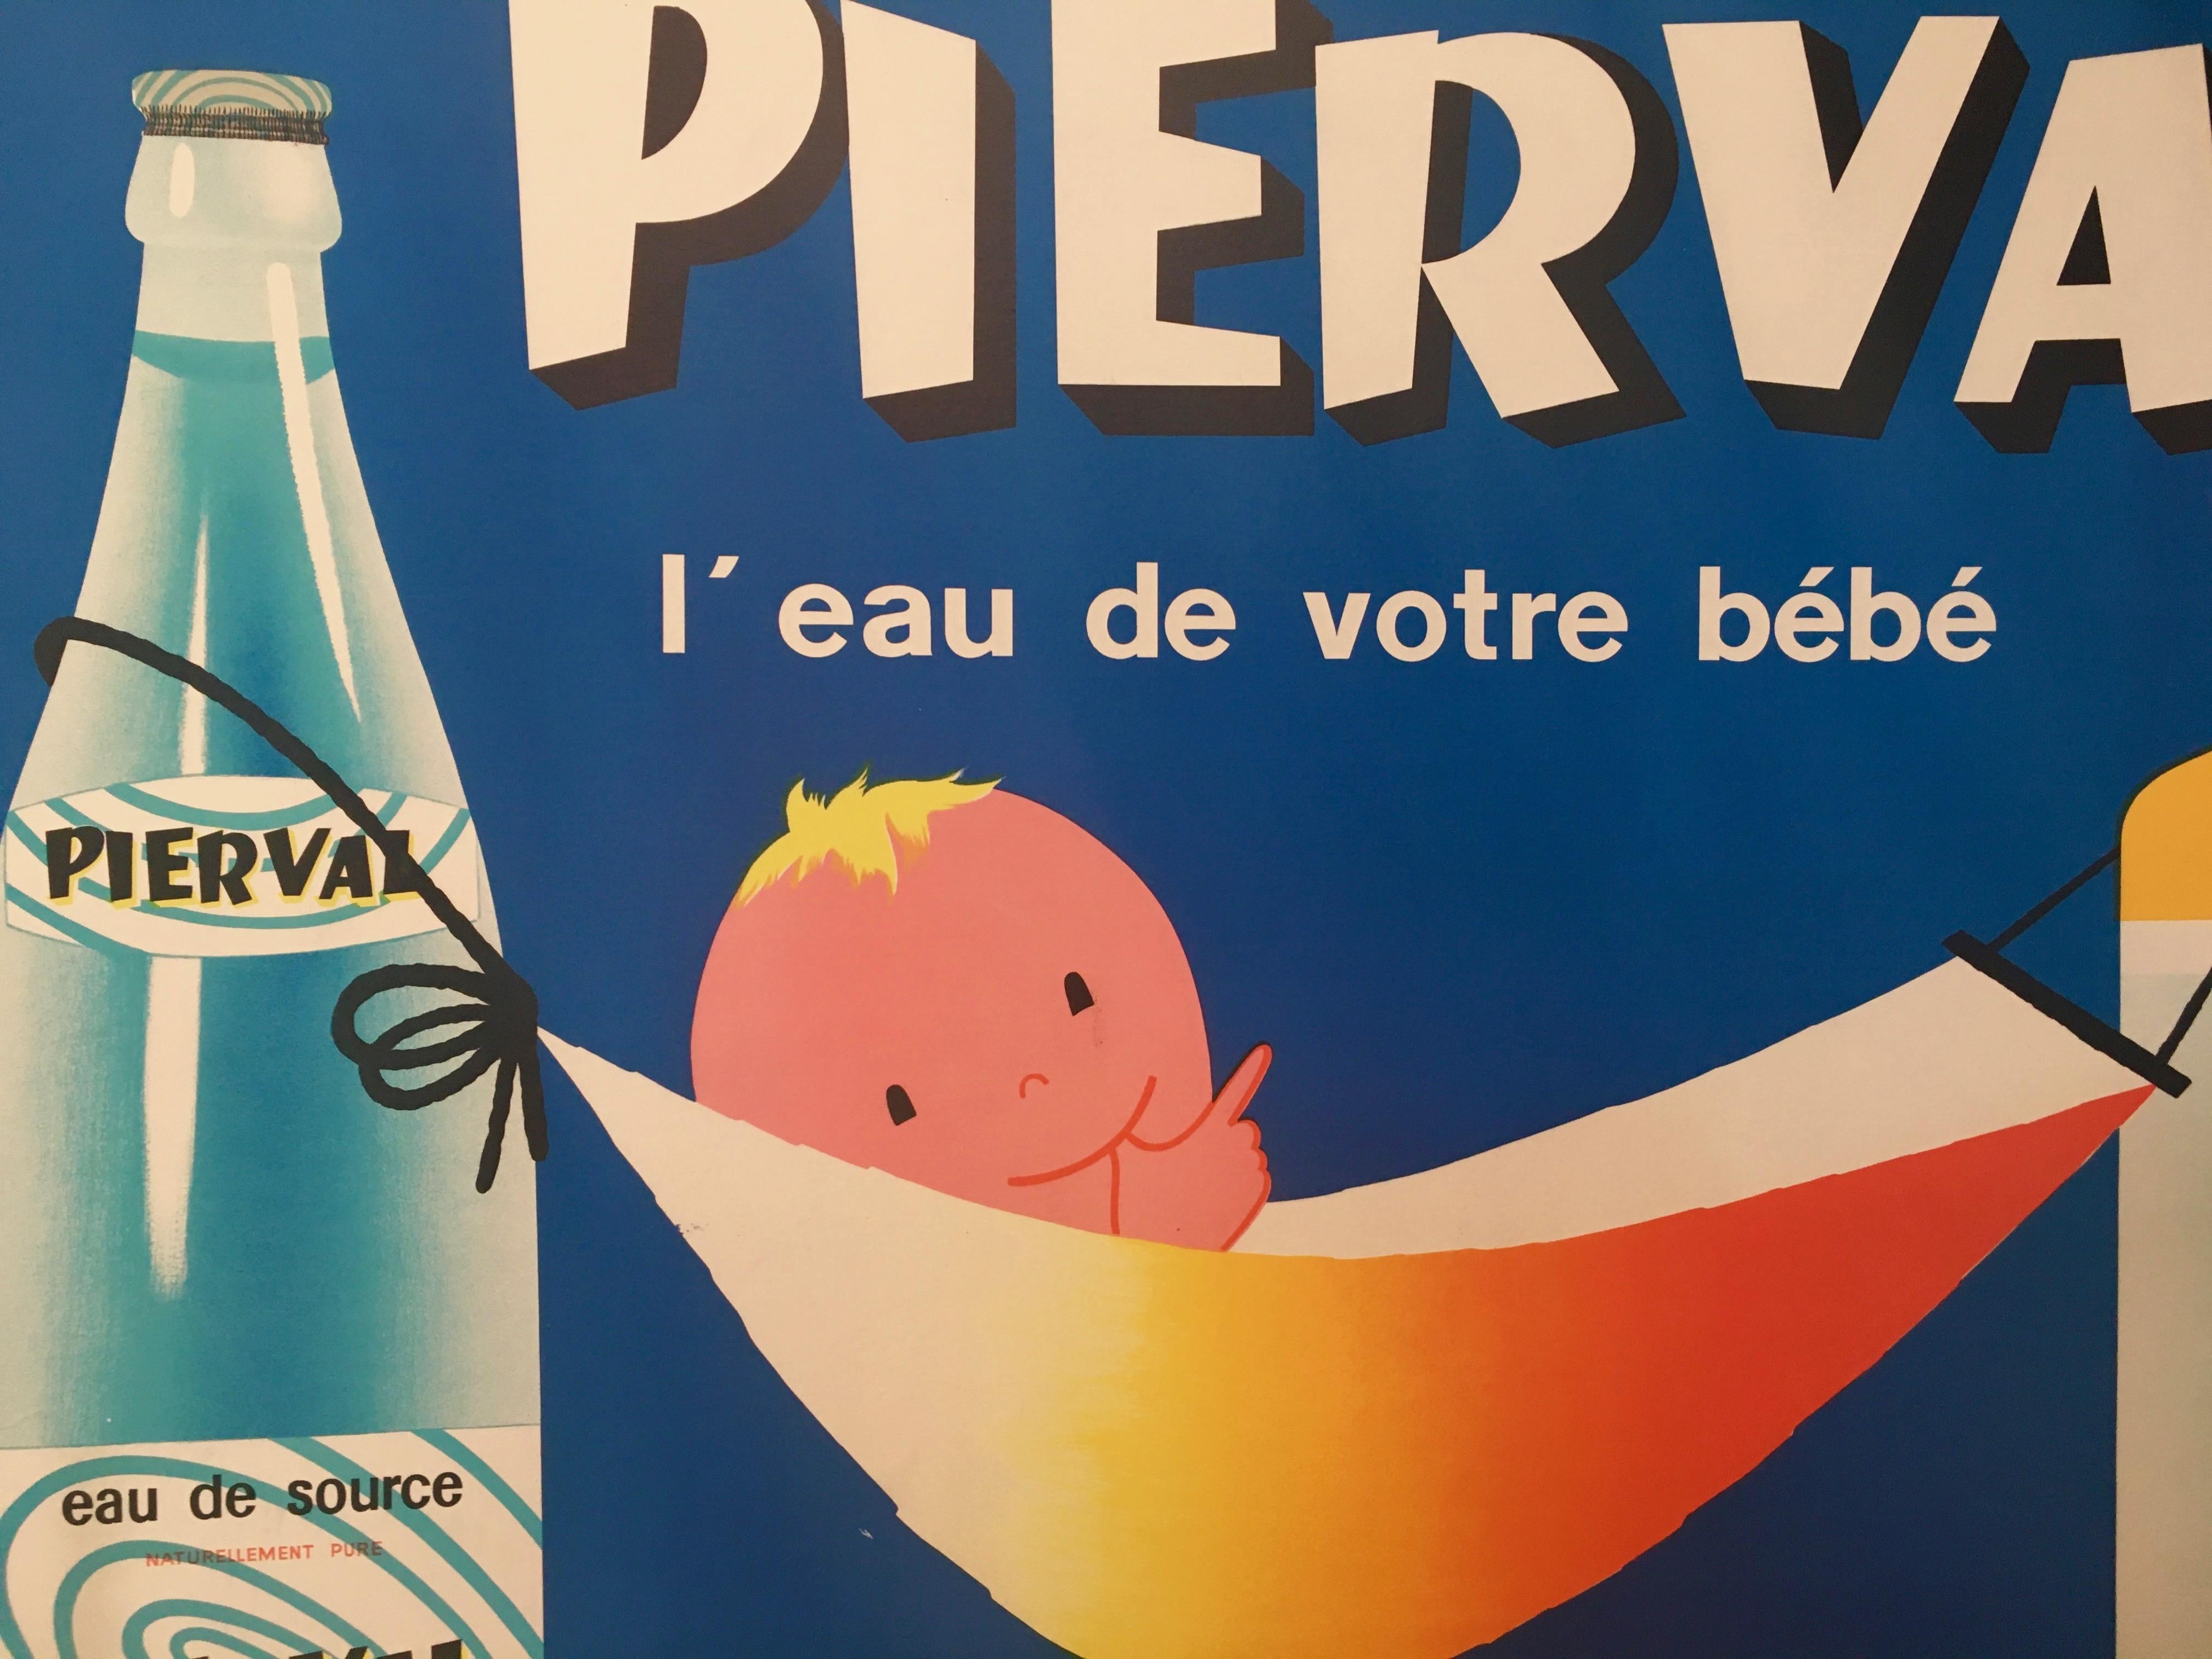 French mineral water original vintage advertising poster, 'Pierval' by J. Auriac

This poster is a certified original vintage poster. It is large poster format featuring a little baby in hammock between a baby bottle and a mineral water bottle.